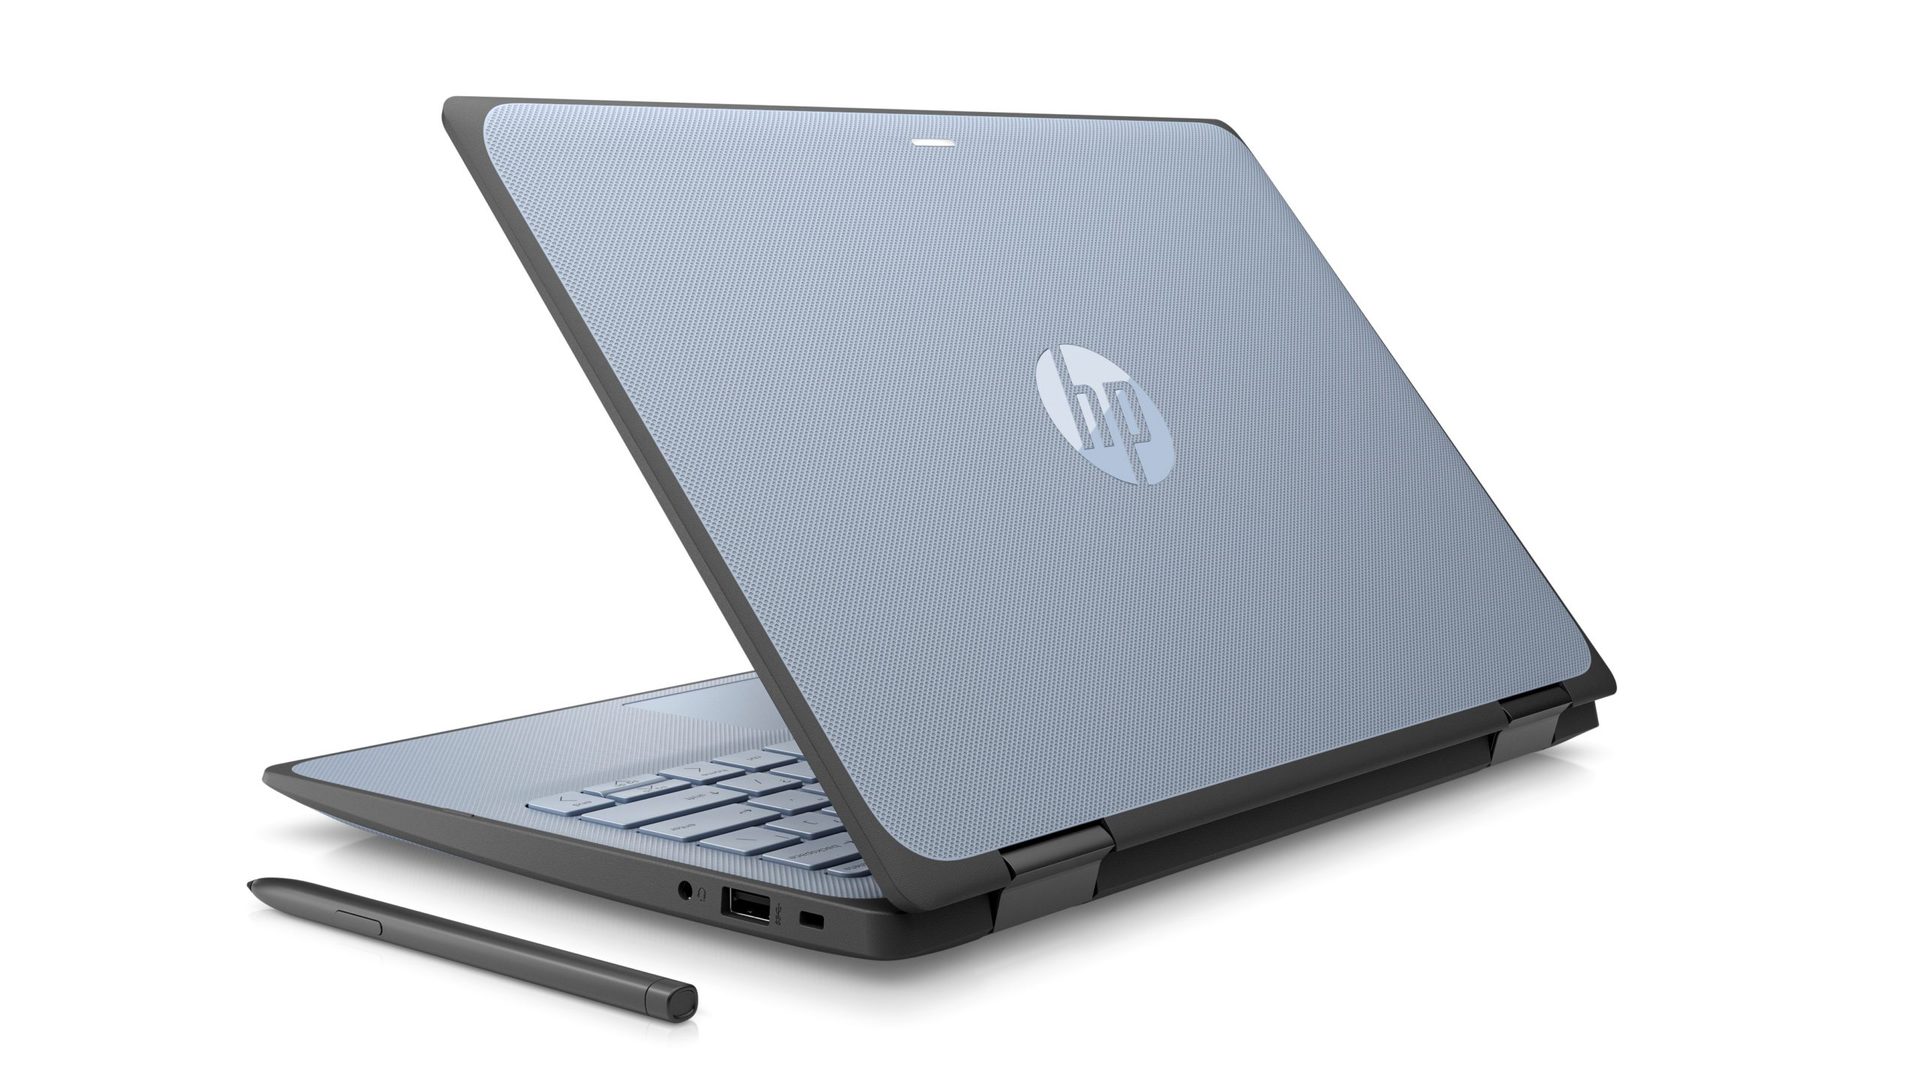 HP's new Fortis series of laptops are focused on practicality and reliability